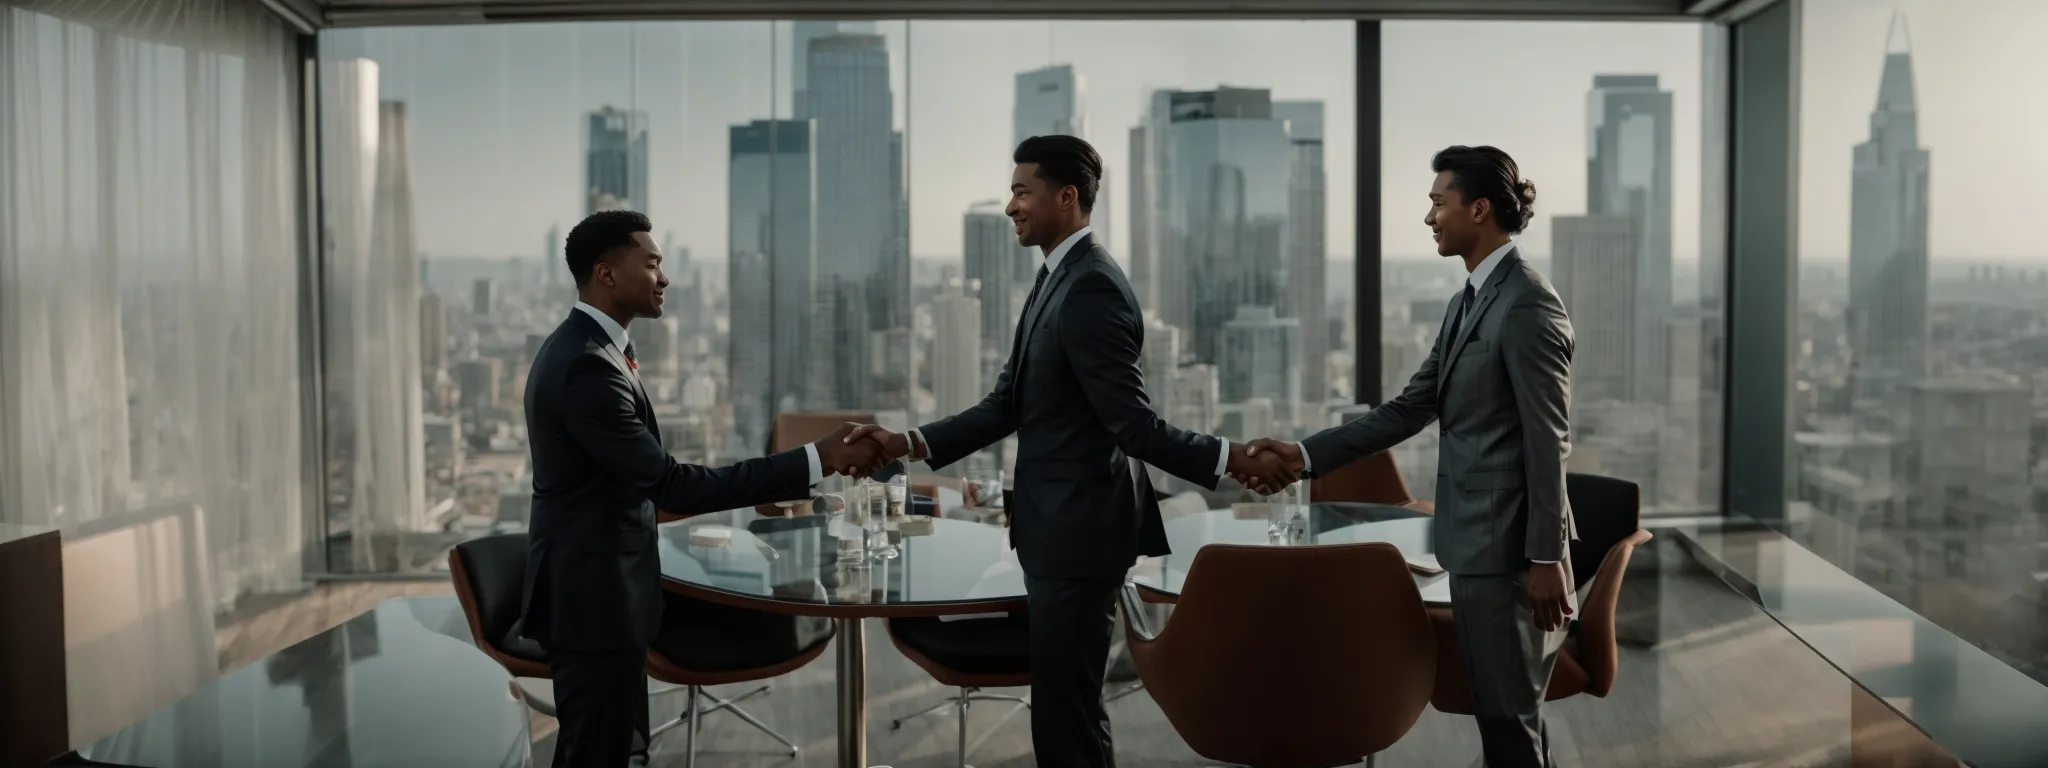 two professionals shaking hands across a table, with a large office window overlooking a city skyline, suggesting a successful business meeting.